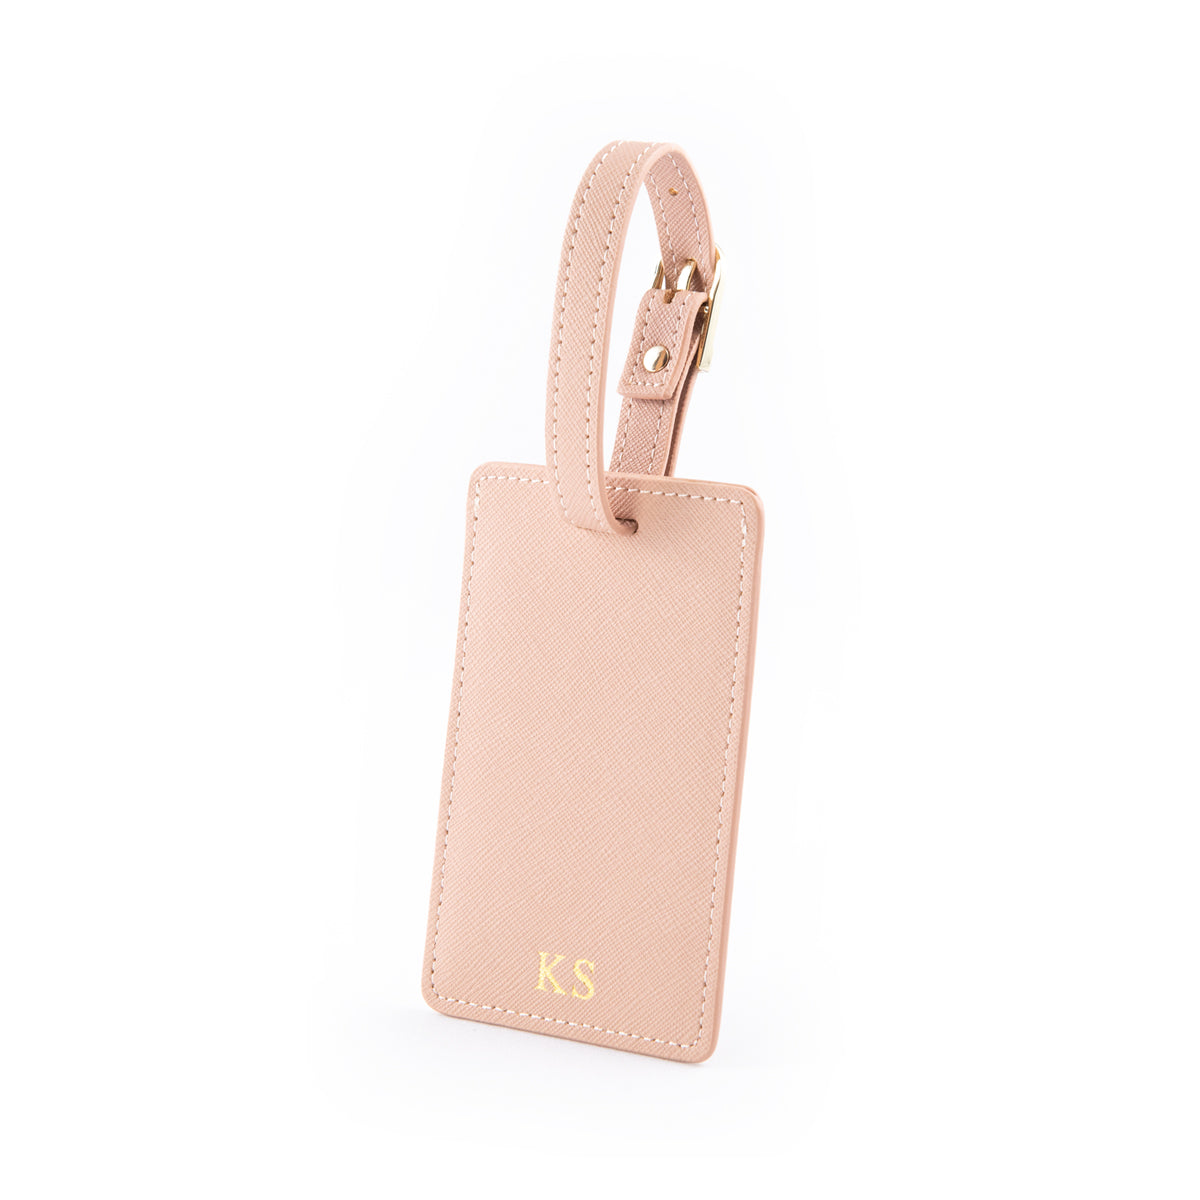 Personalised Saffiano Leather Passport Holder & Luggage Tag